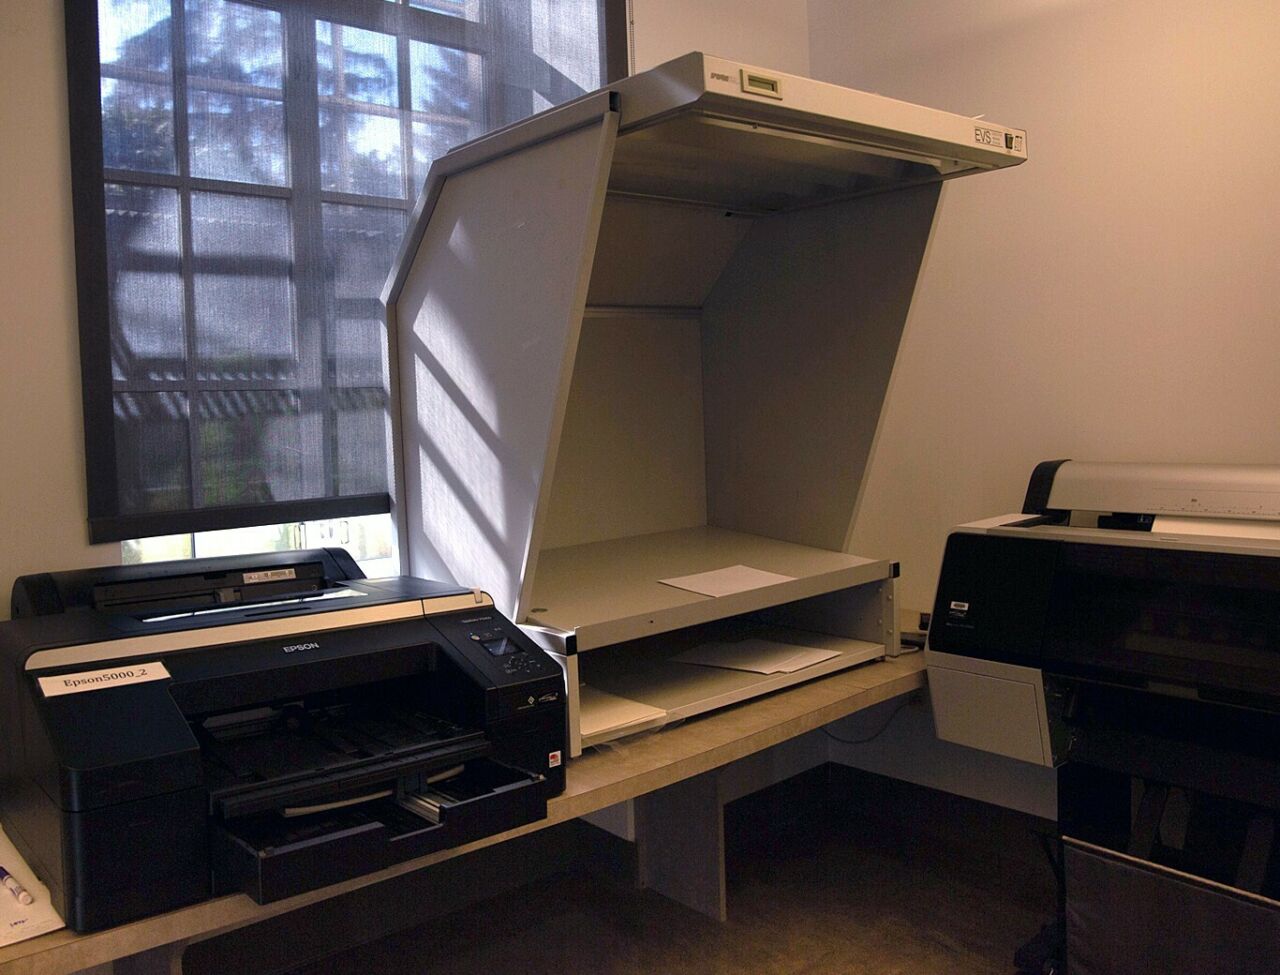 State of the art Epson printers, scanners and comp station for students.